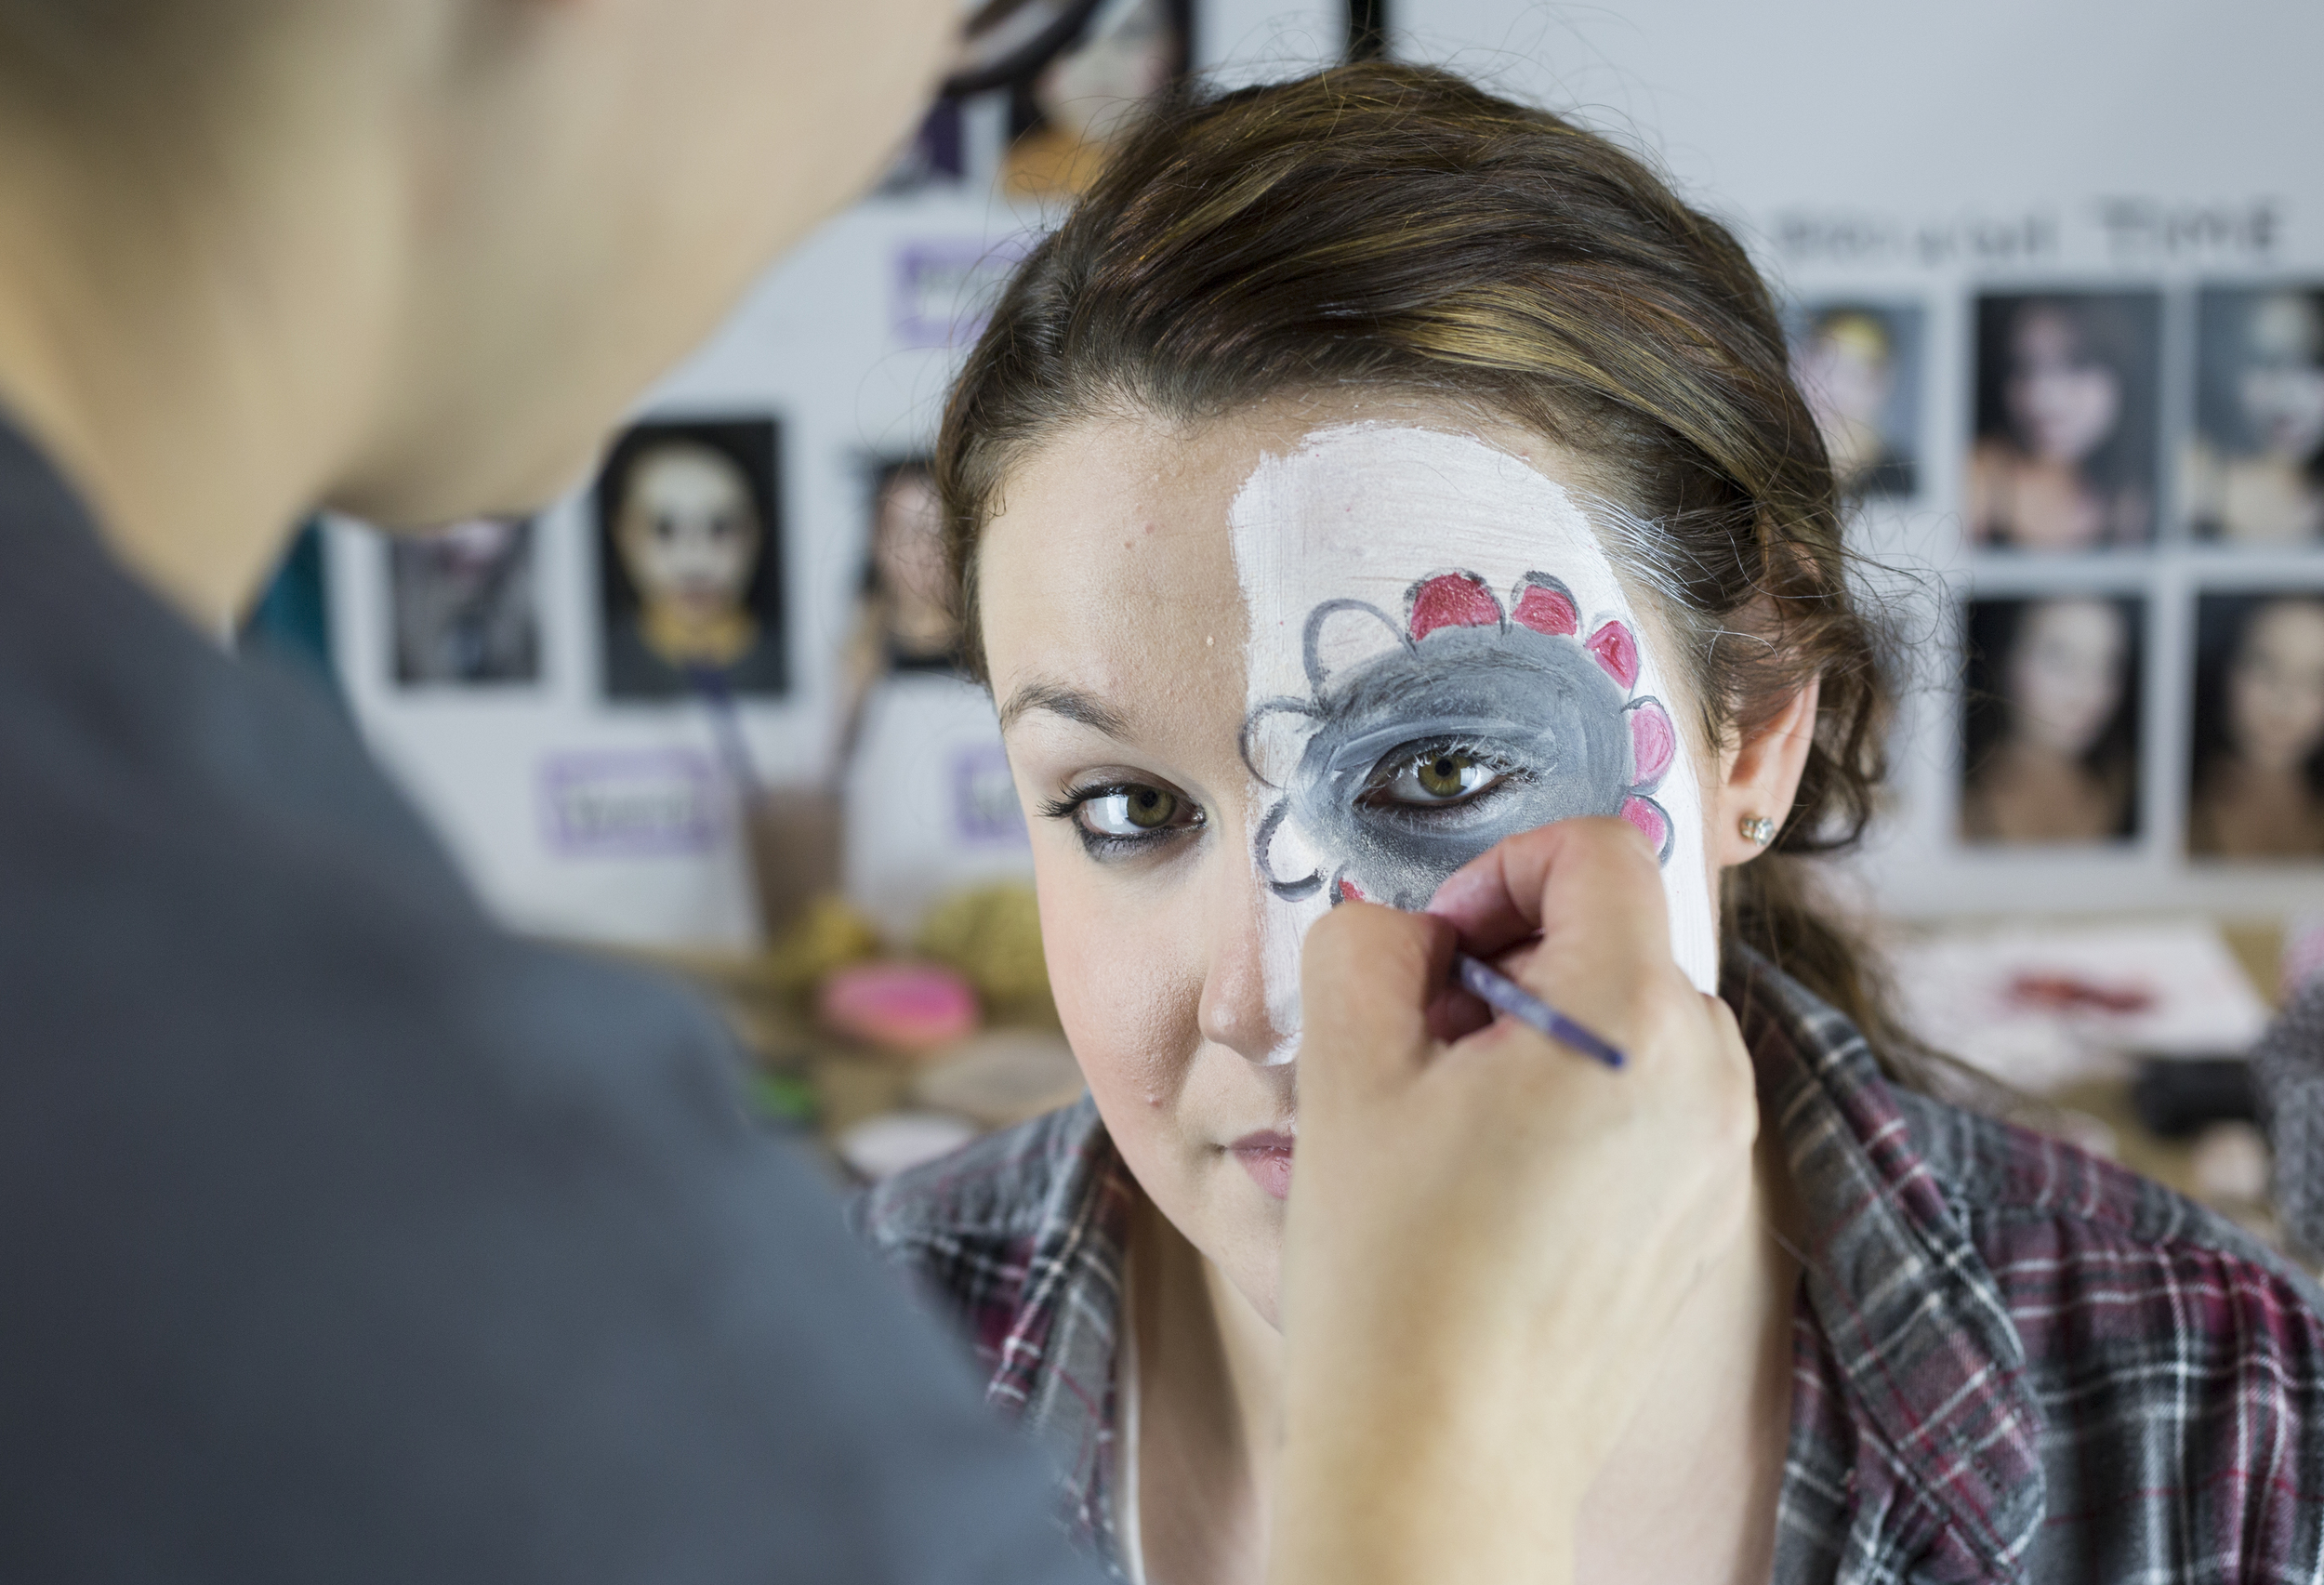  Abby Barnett, a junior at Vinton County High School, gets her face painted with Day of the Dead makeup by Kristen Fechtel, left, a senior studying scenic painting at Ohio University at the Student Expo in Ohio University's Convocation Center on Apri